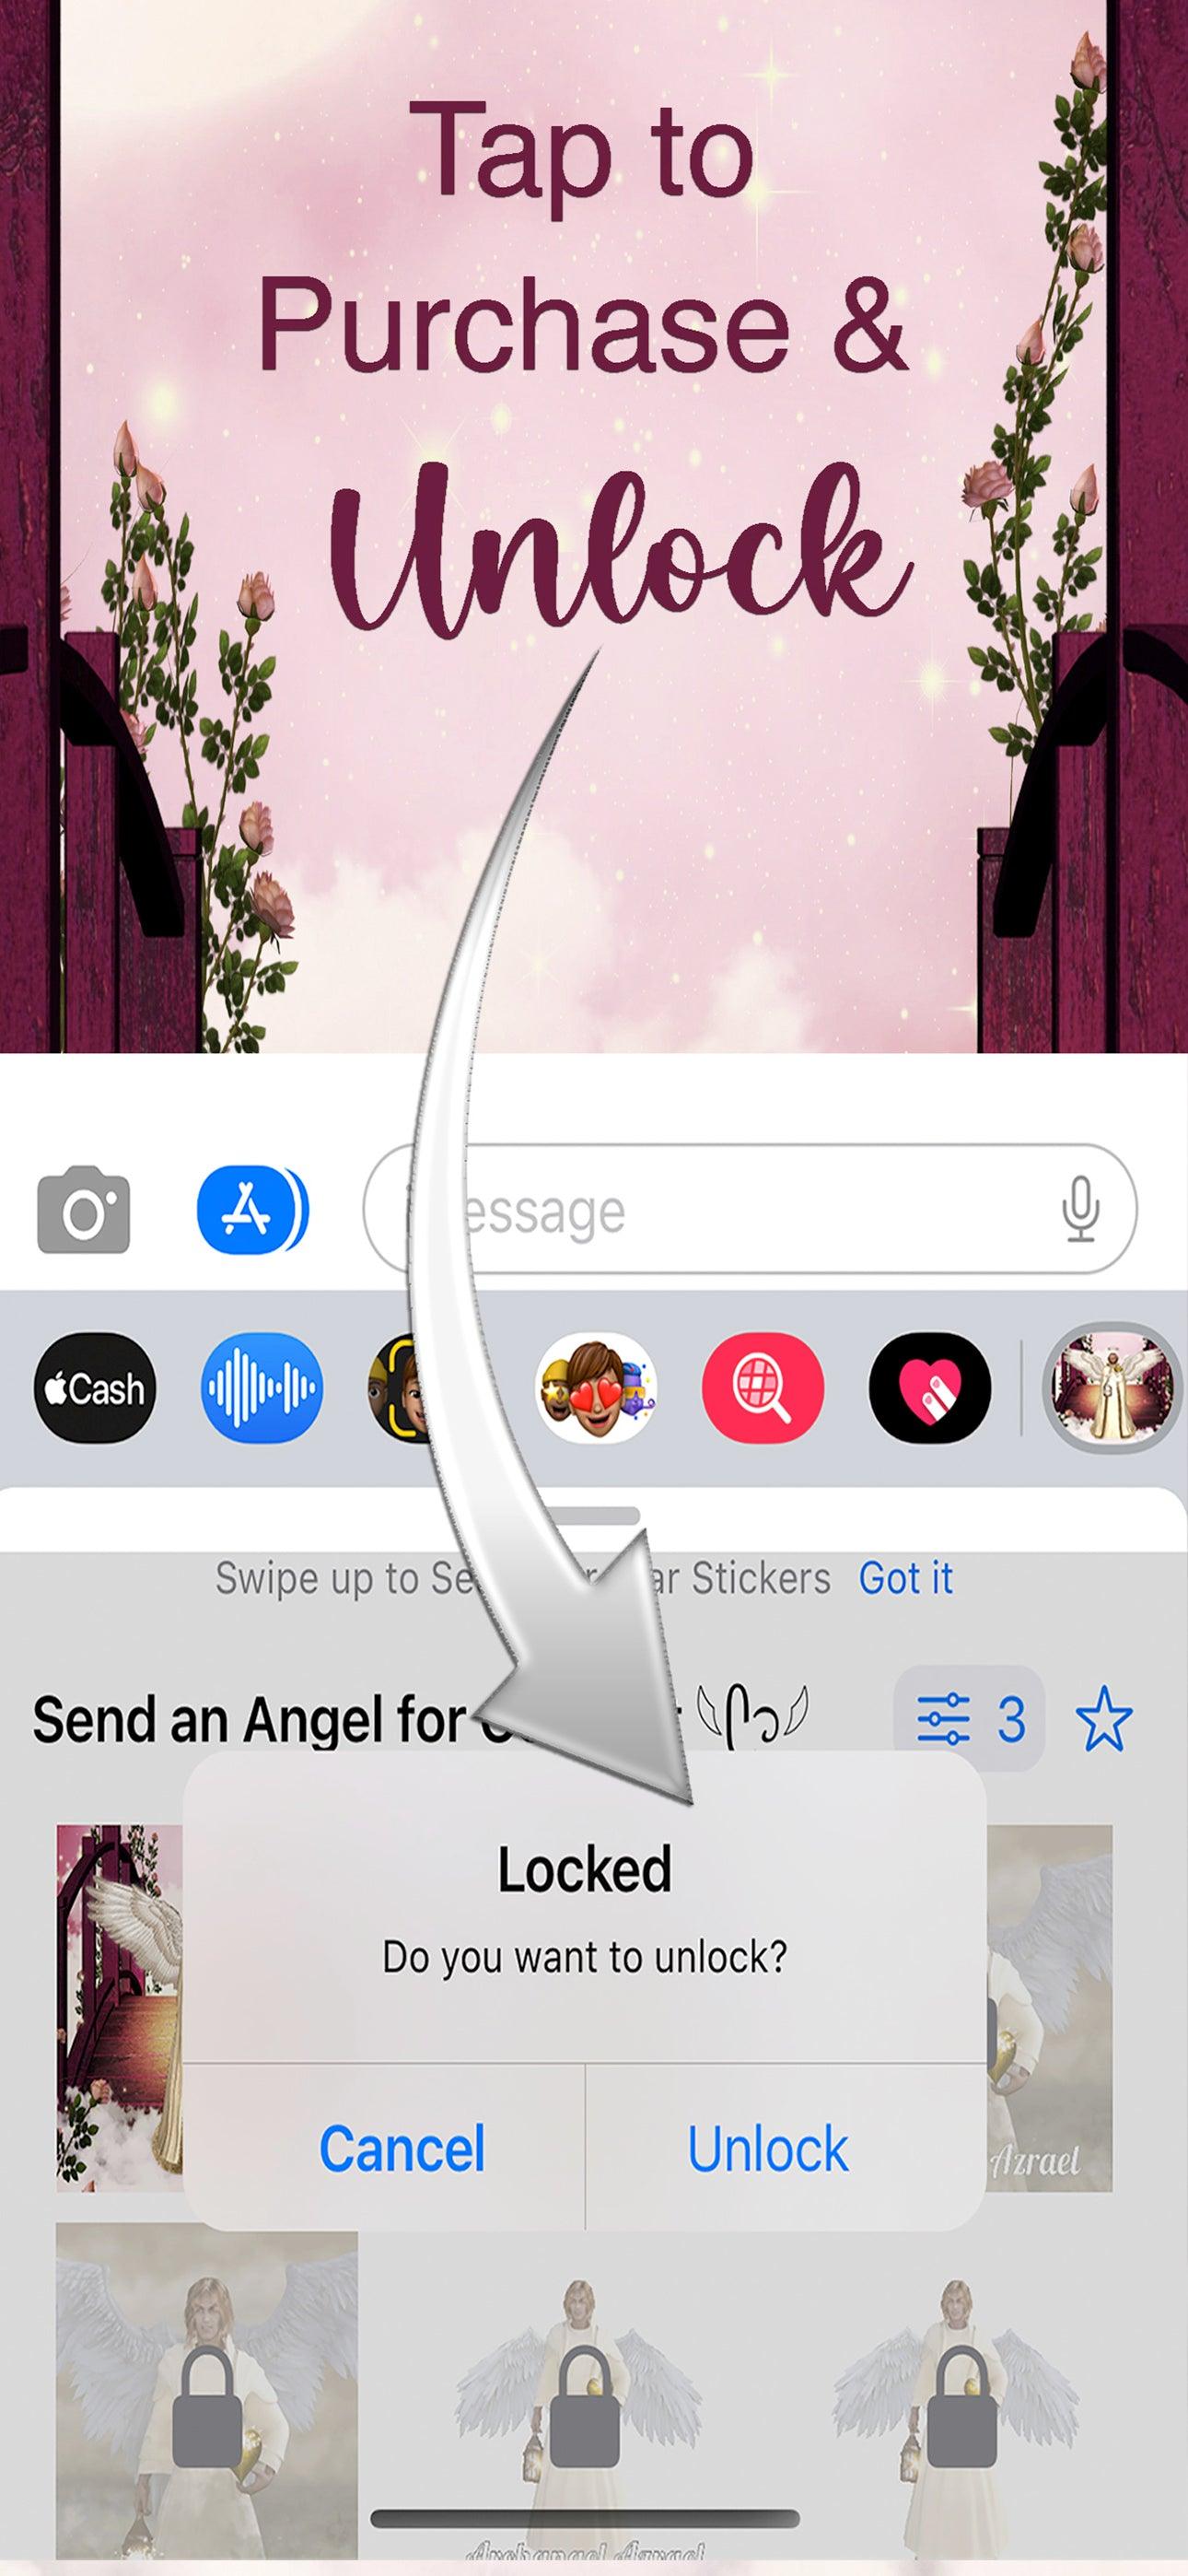 More Than Charms Sending You An Angel For Comfort: iMessage Sticker Pack